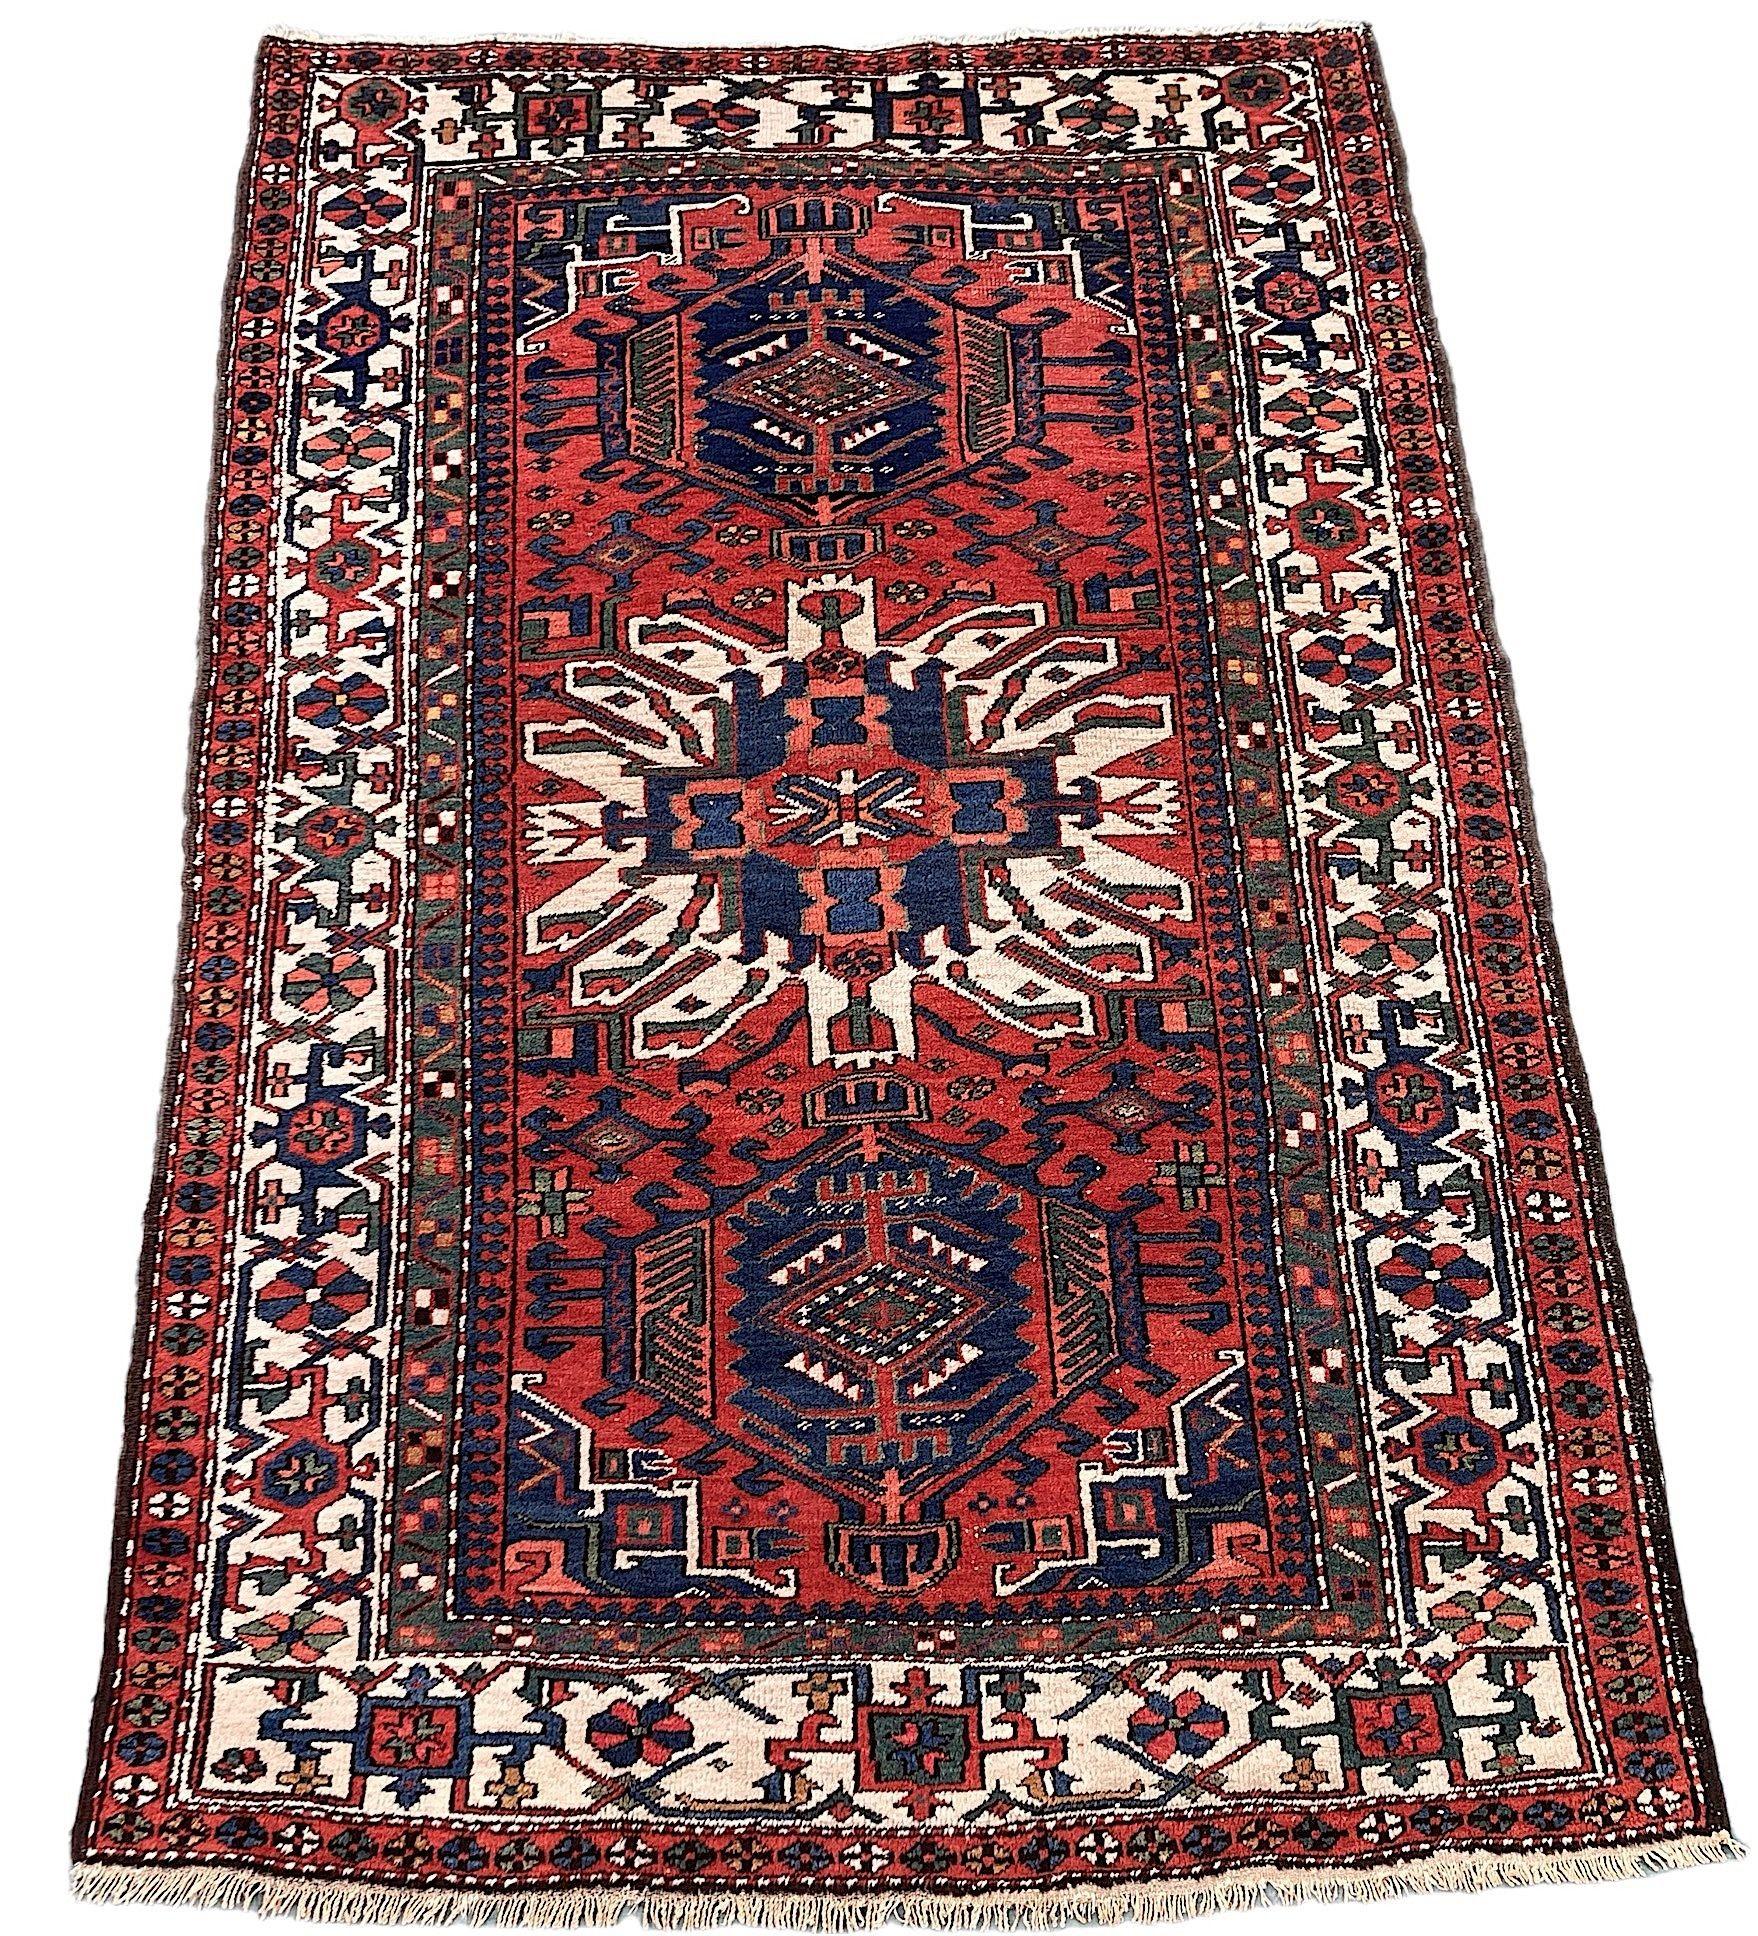 A beautiful antique Heriz rug, hand woven circa 1910. The design features 3 geometrical medallions on a rich red field surrounded by a wide, ivory border. Particularly attractive secondary colours of greens, golds and pinks.
Size: 2.05m x 1.37m (6ft